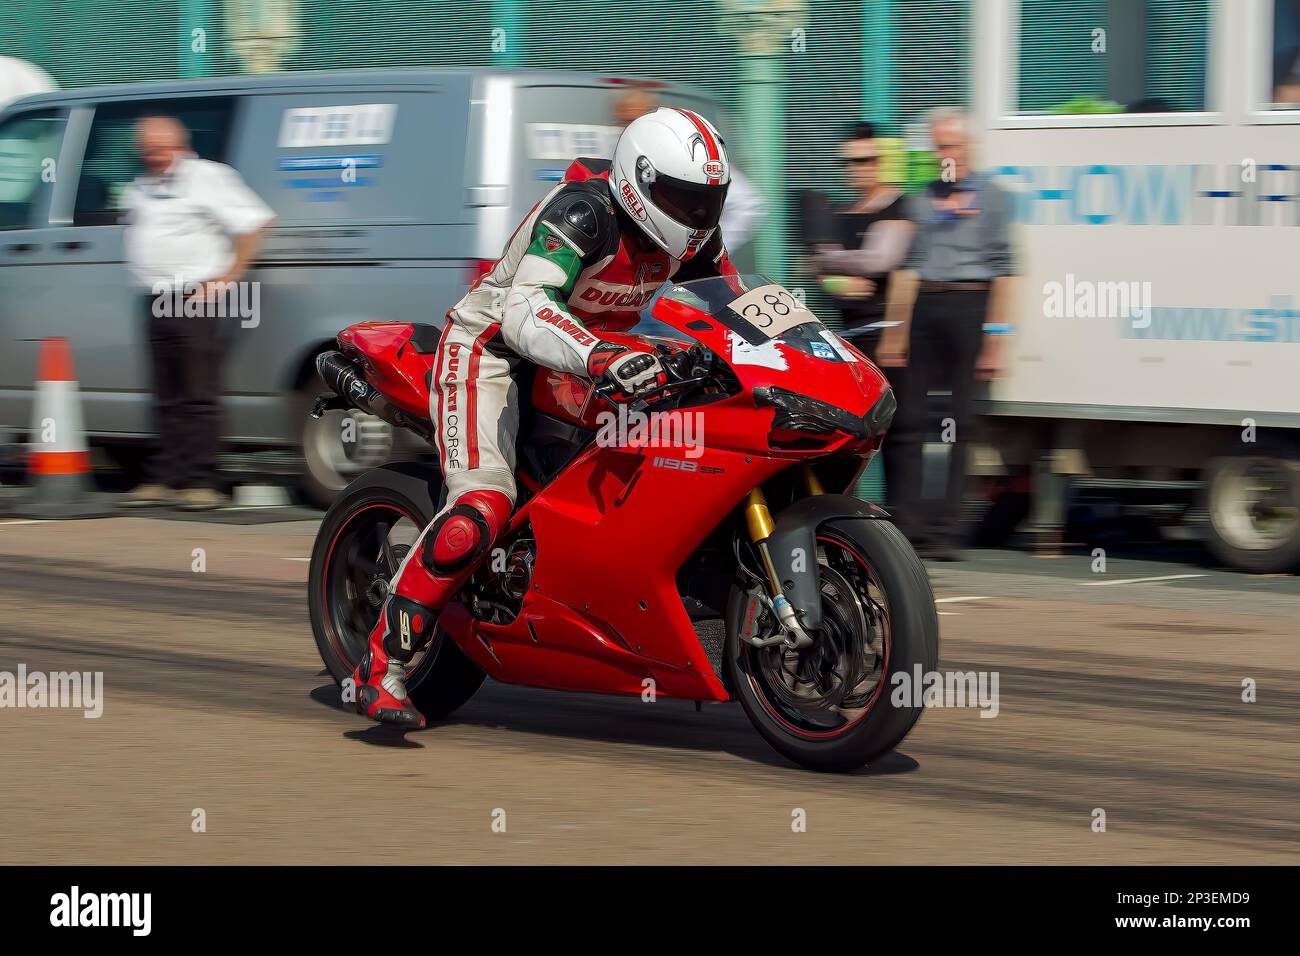 The event is currently run as a quarter mile sprint for both cars and motorcycles, held under the auspices of the Motor Sports Association. This image features Andrew Dubery riding a Ducati 1198 SP. The event is organised by the Brighton and Hove Motor Club run along Madeira Drive, Brighton Sea Front, City of Brighton & Hove, UK. 2nd September 2017 Stock Photo